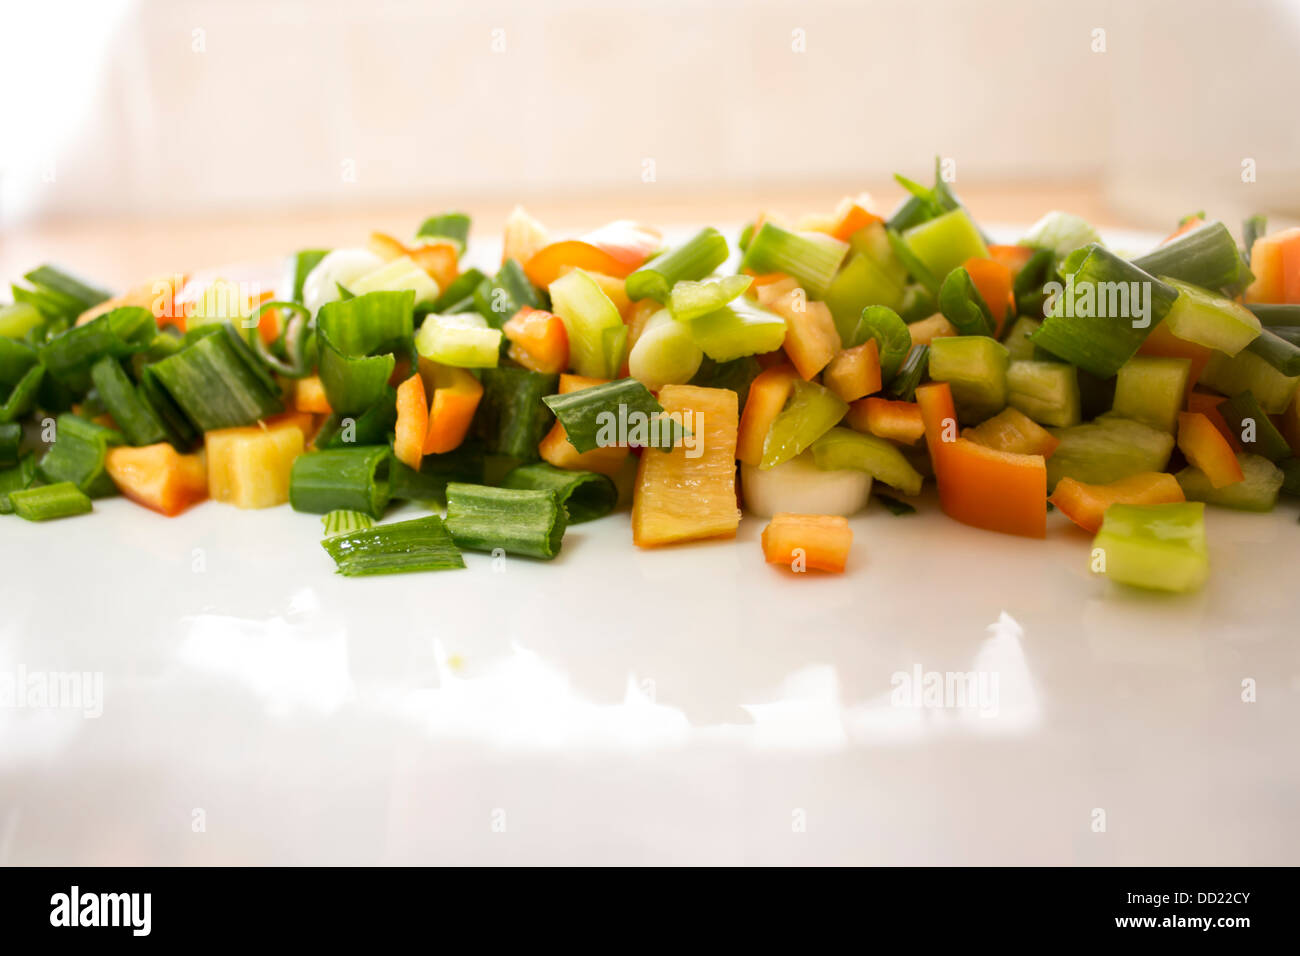 Chopped vegetables in a plate Stock Photo